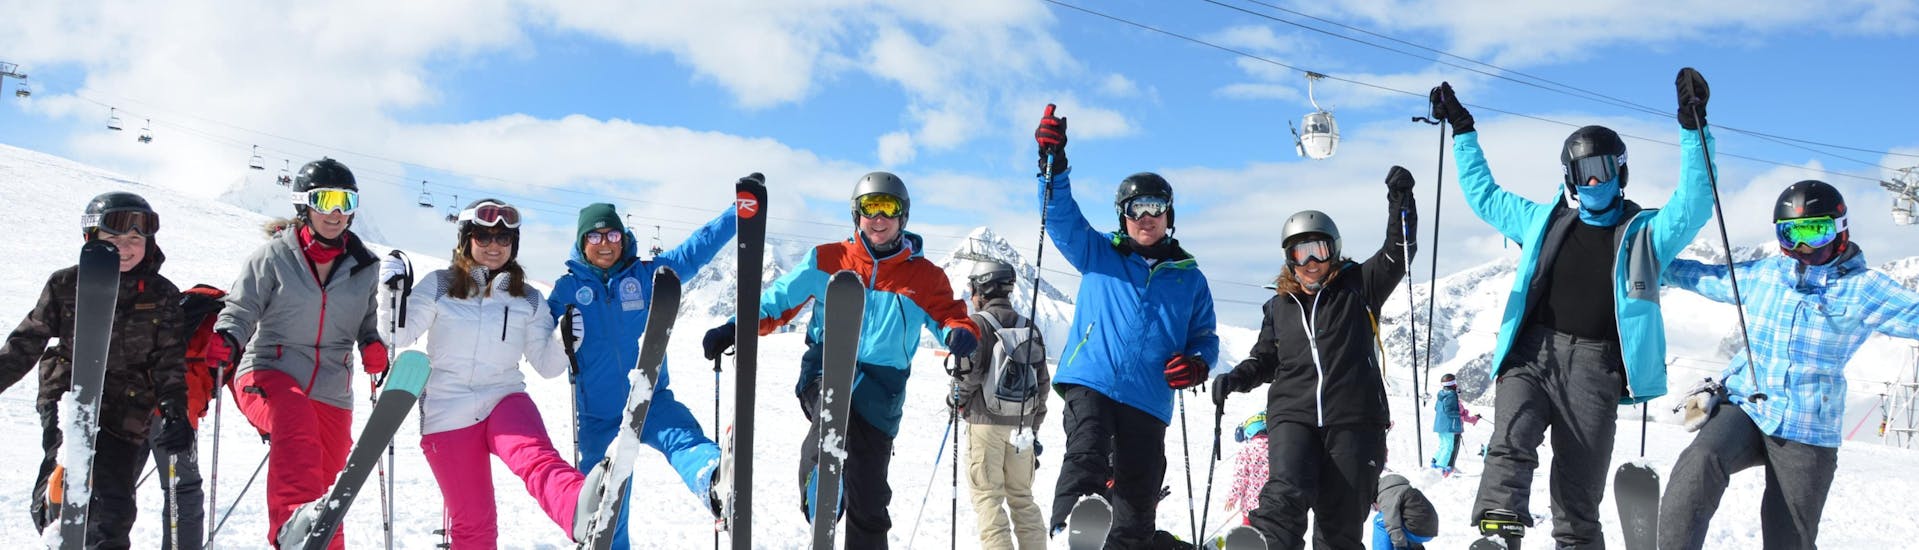 An unforgettable moment on the slopes for participants during teen and adult ski lessons with the Europen Ski School in Les Deux Alpes. 